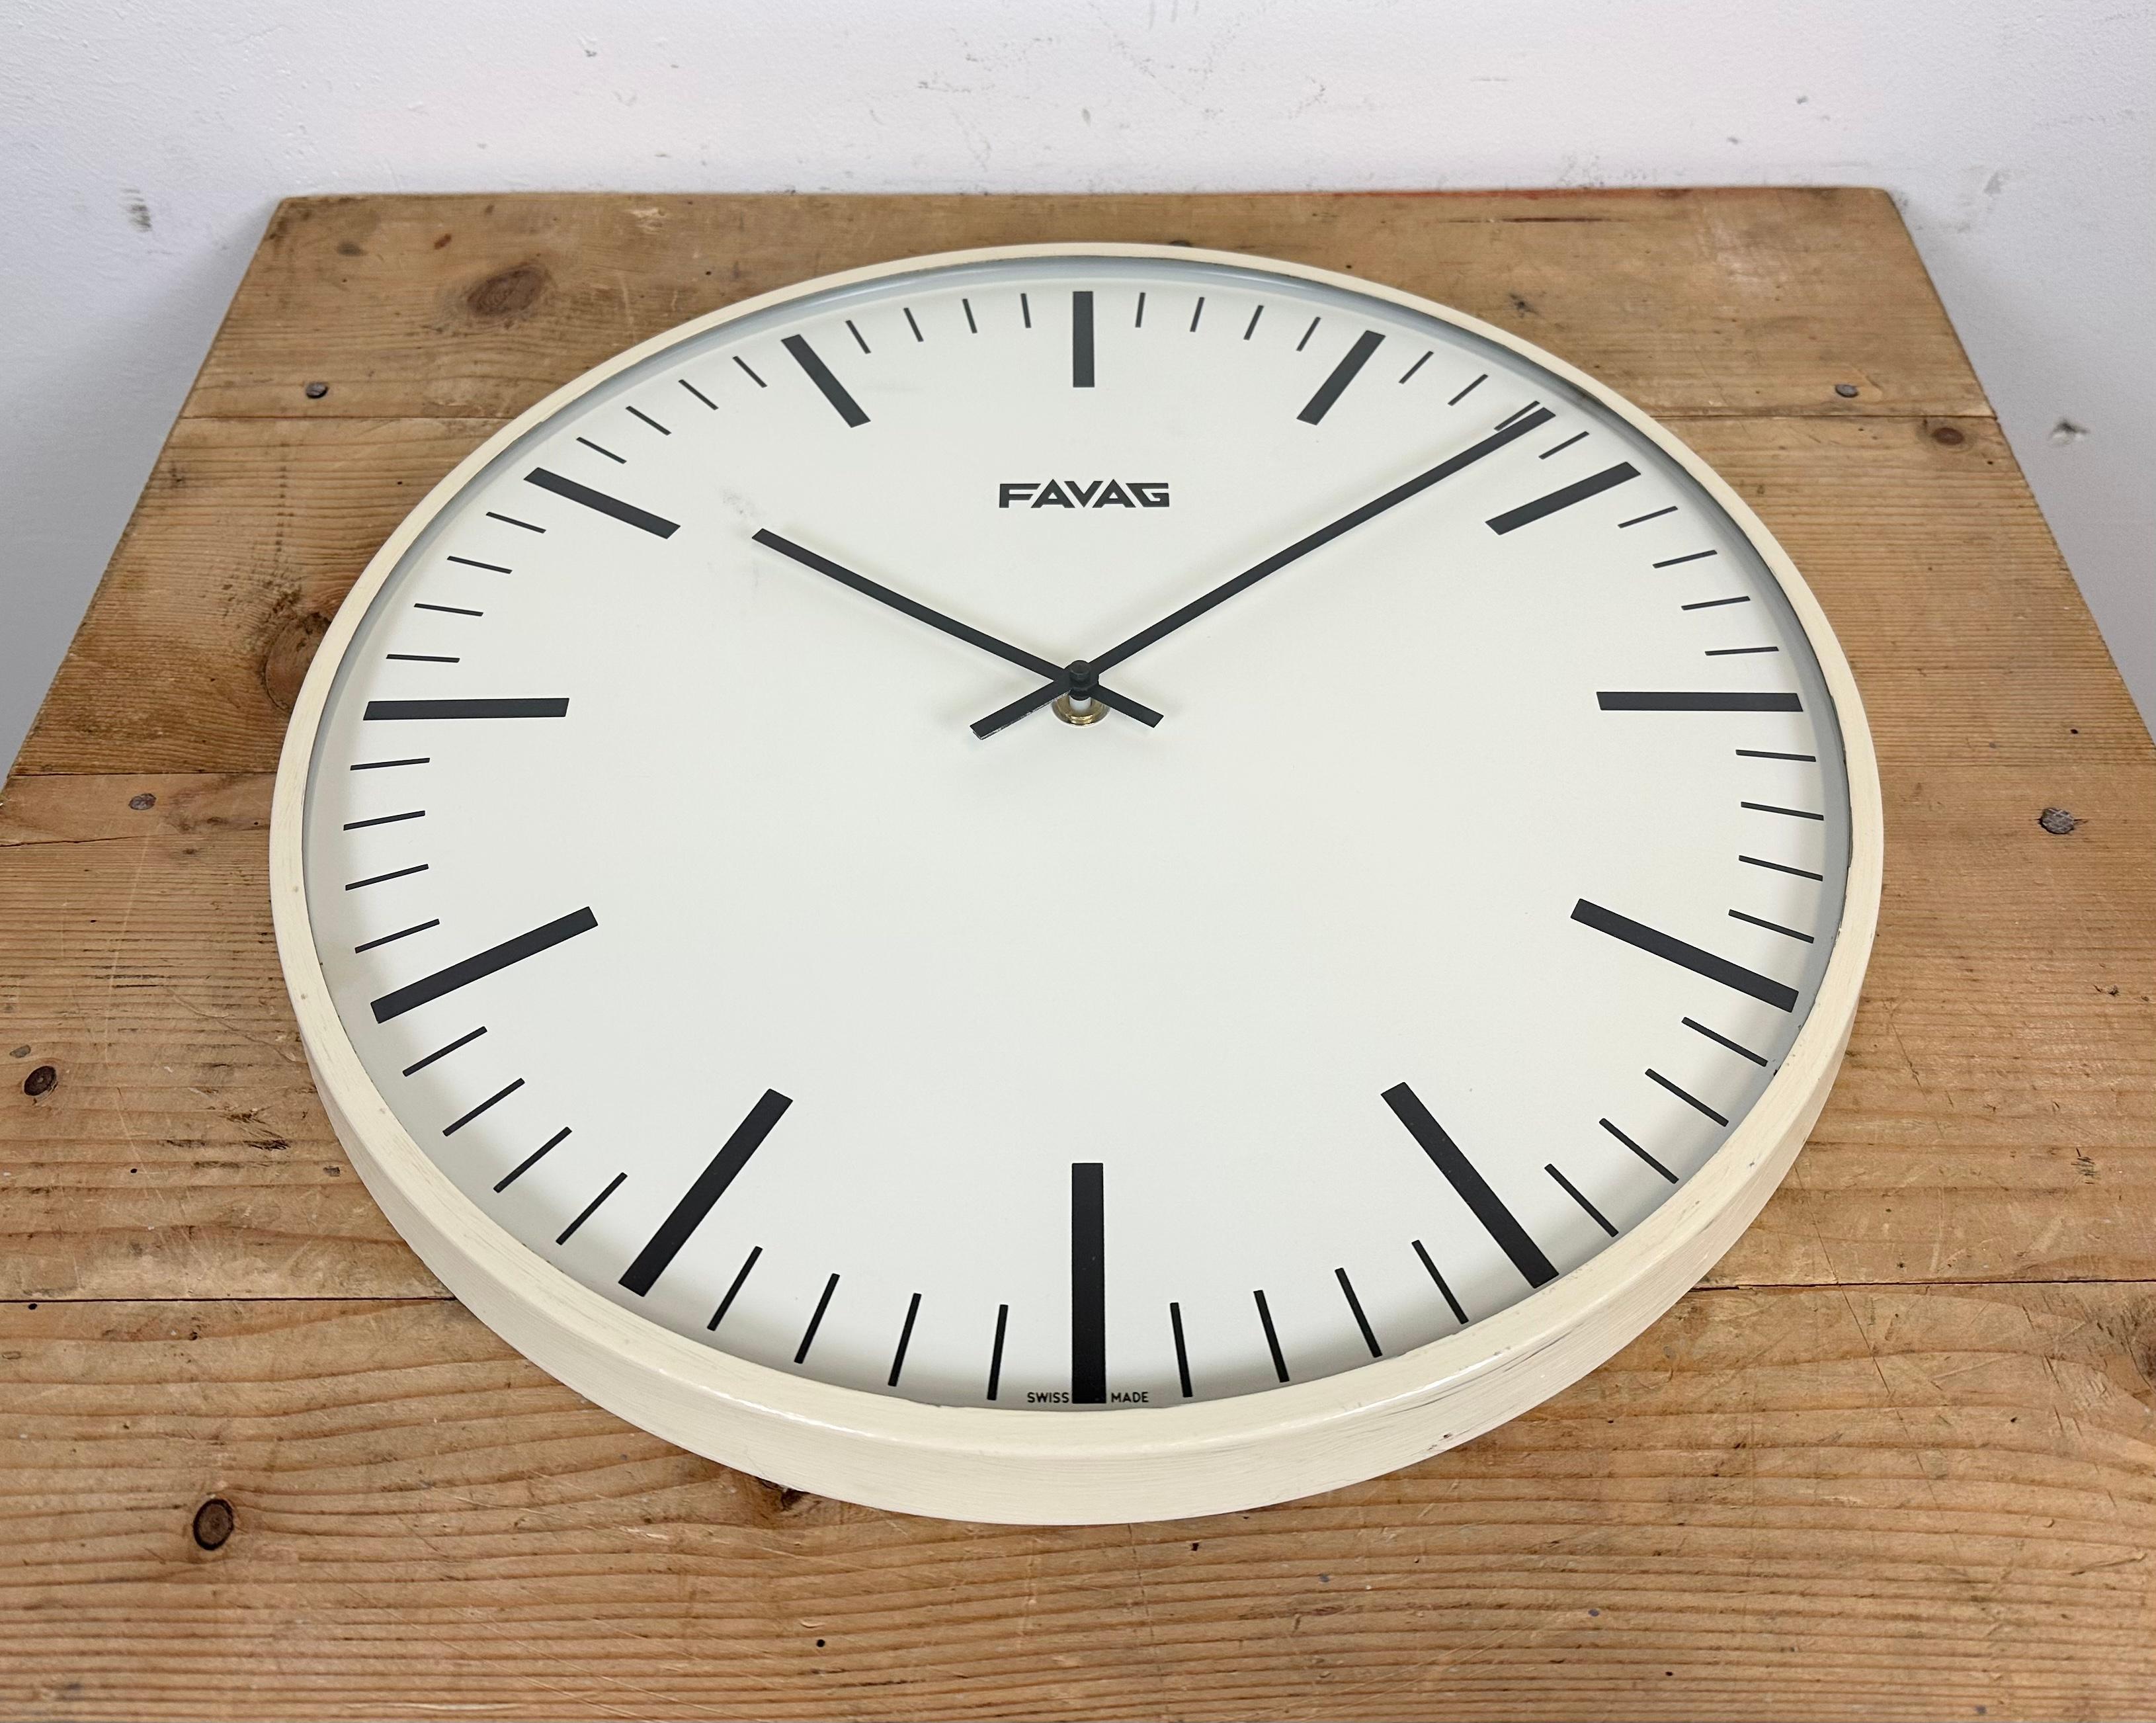 Vintage Swiss Beige Wall Clock from Favag, 1970s In Good Condition For Sale In Kojetice, CZ